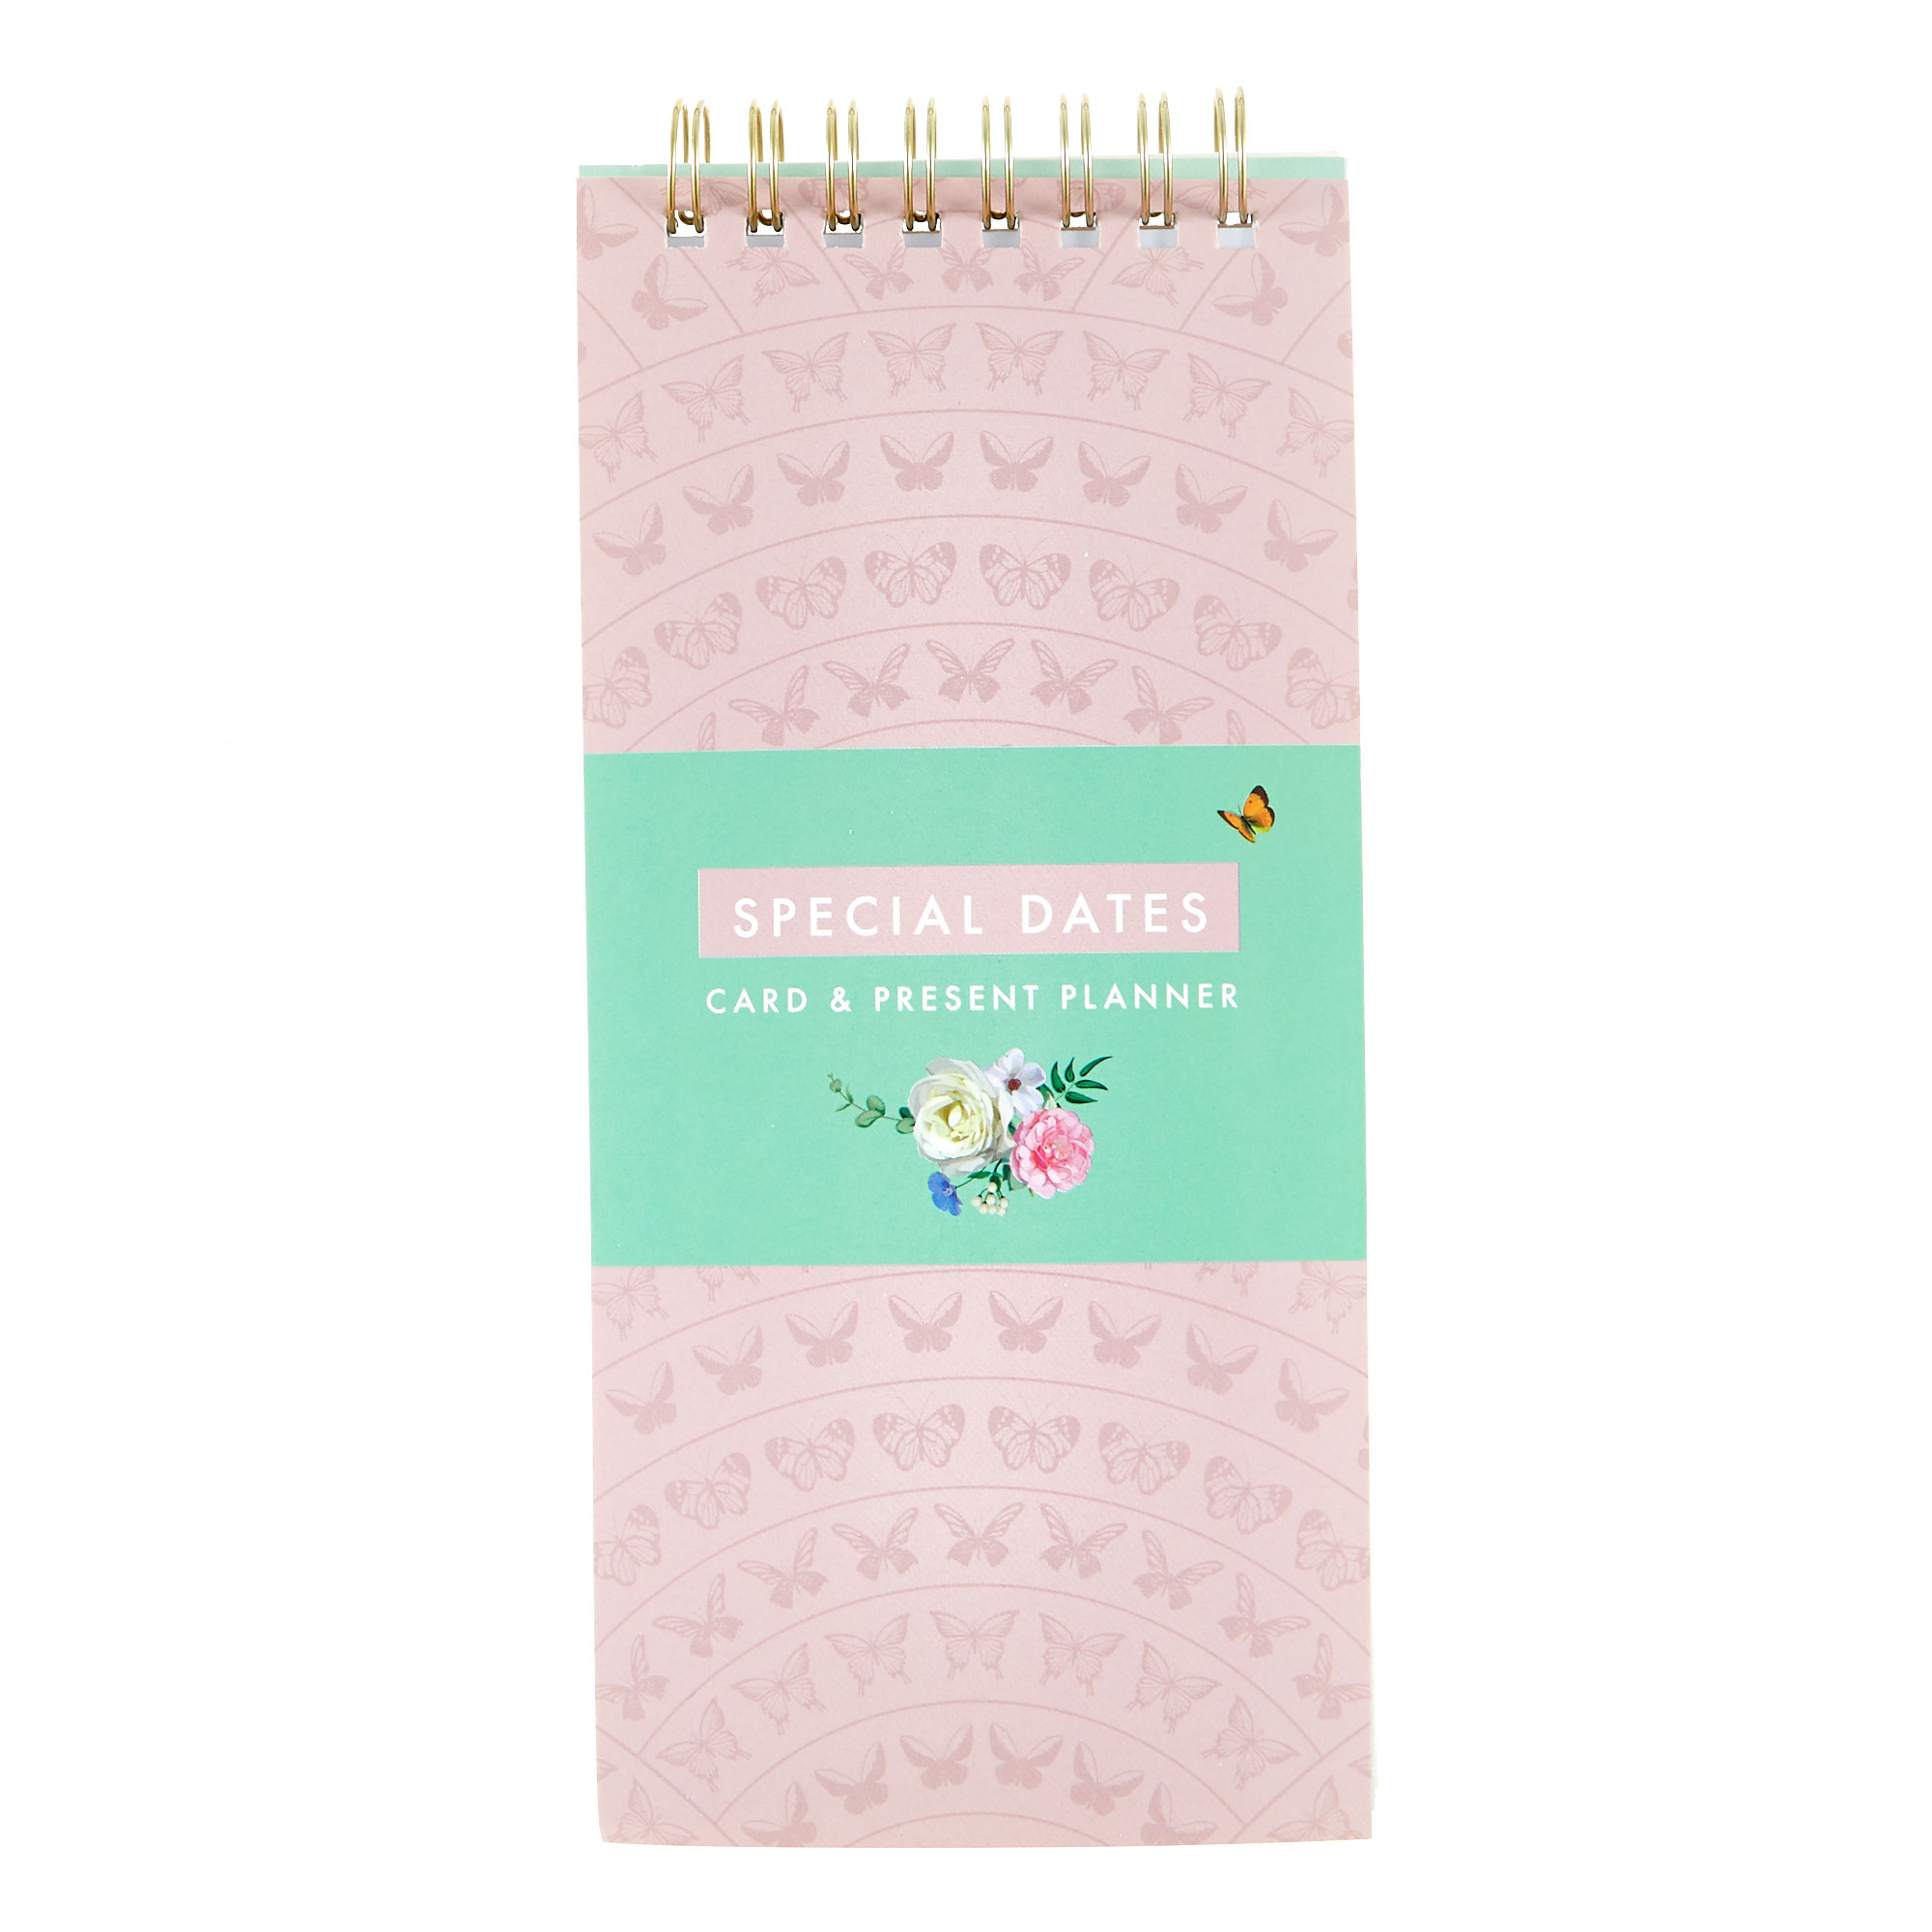 Special Dates Card & Present Planner 